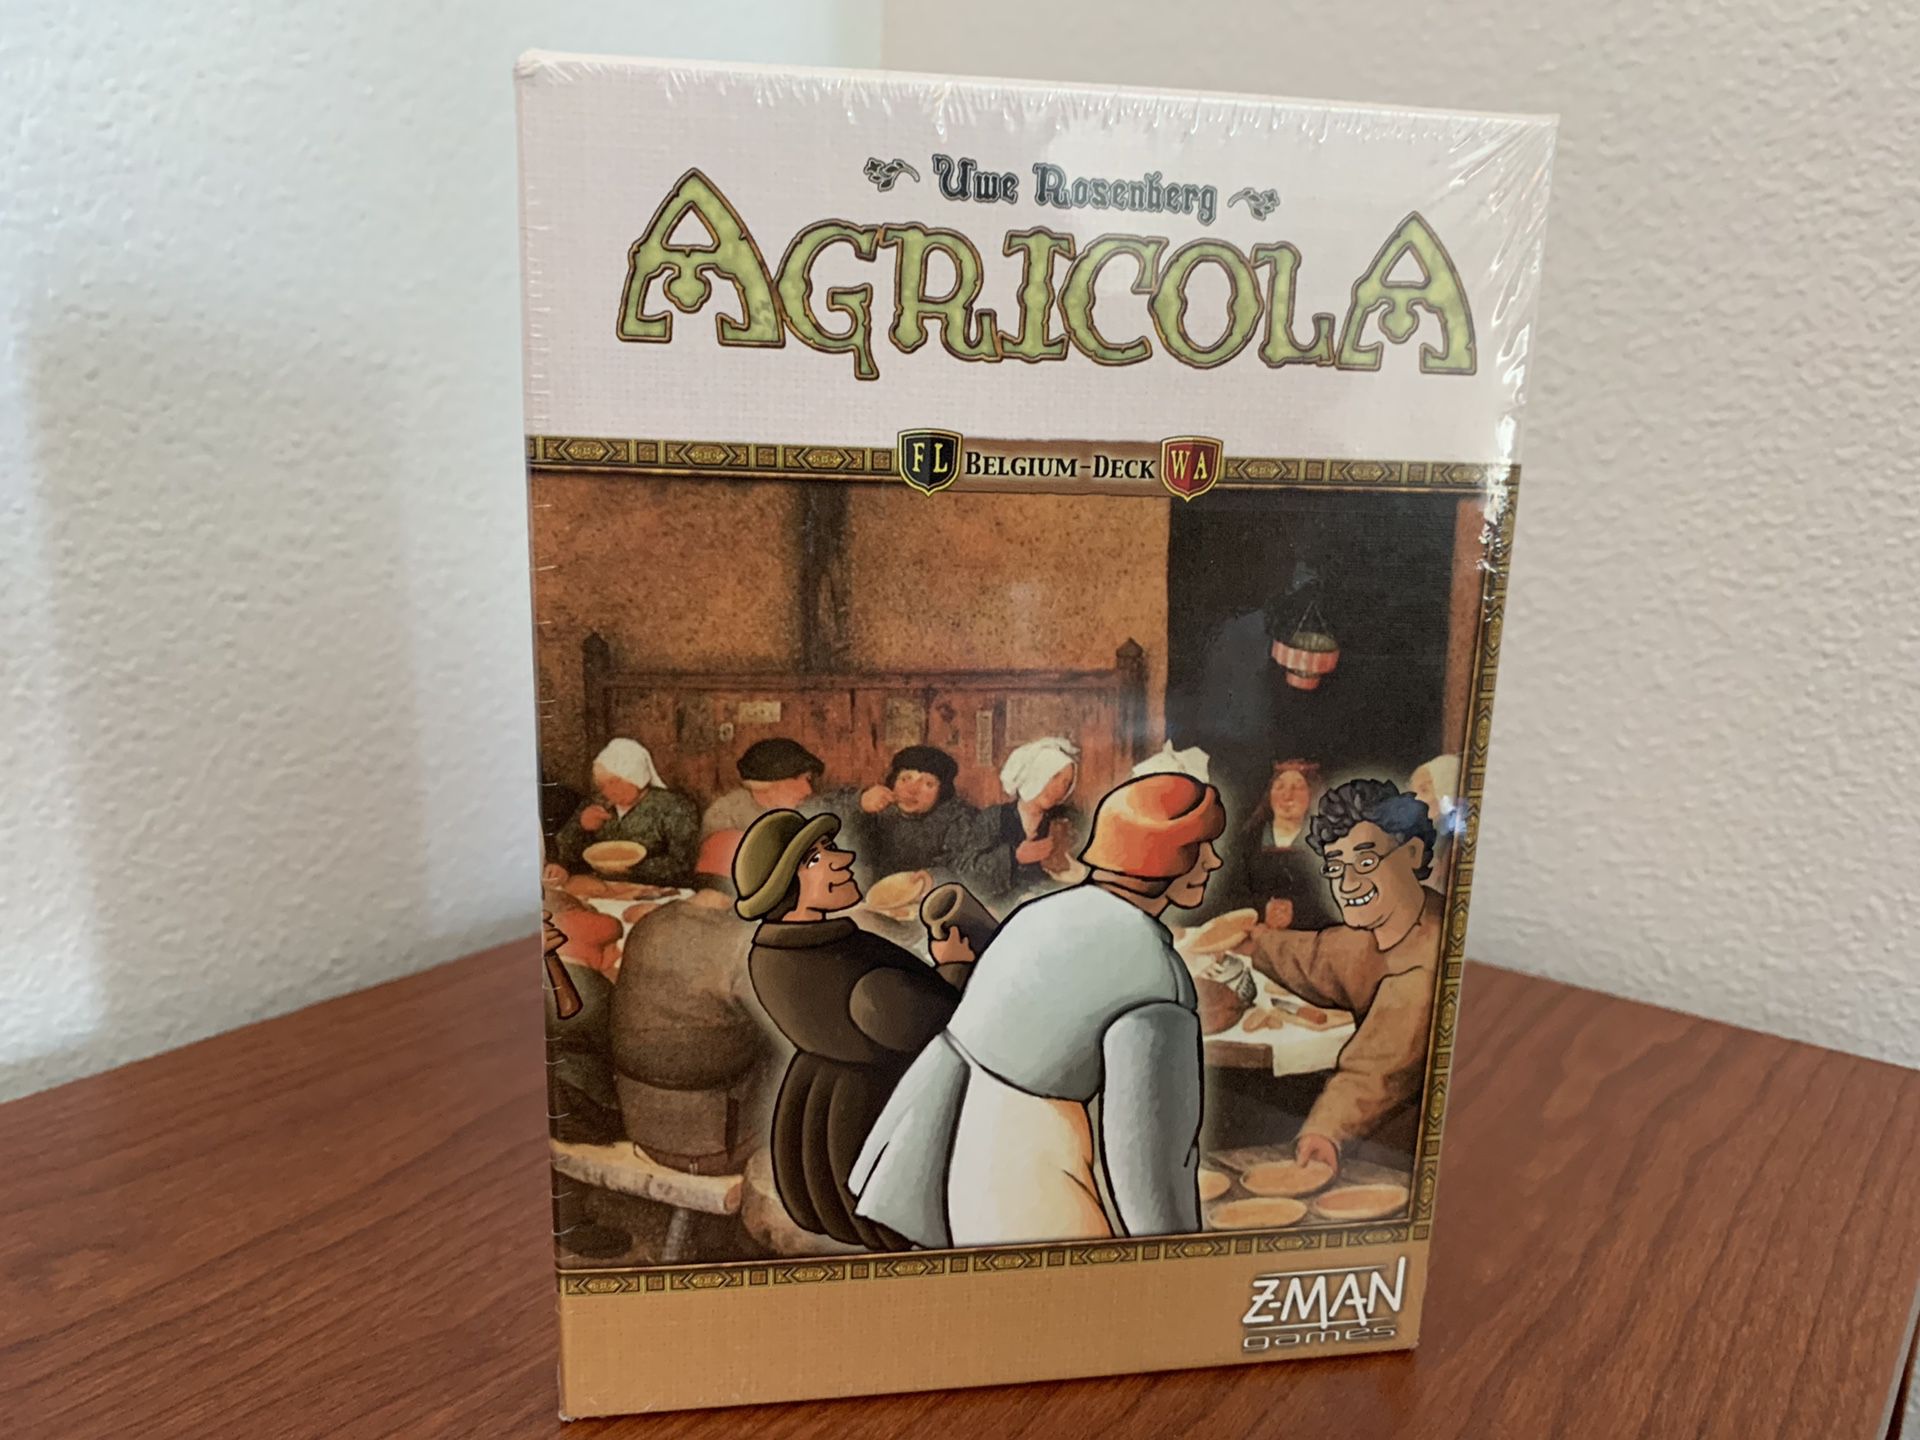 AGRICOLA BELGIUM DECK Board Game Expansion (Z-Man Games) - RARE & Out of Print - BRAND NEW in SHRINK!